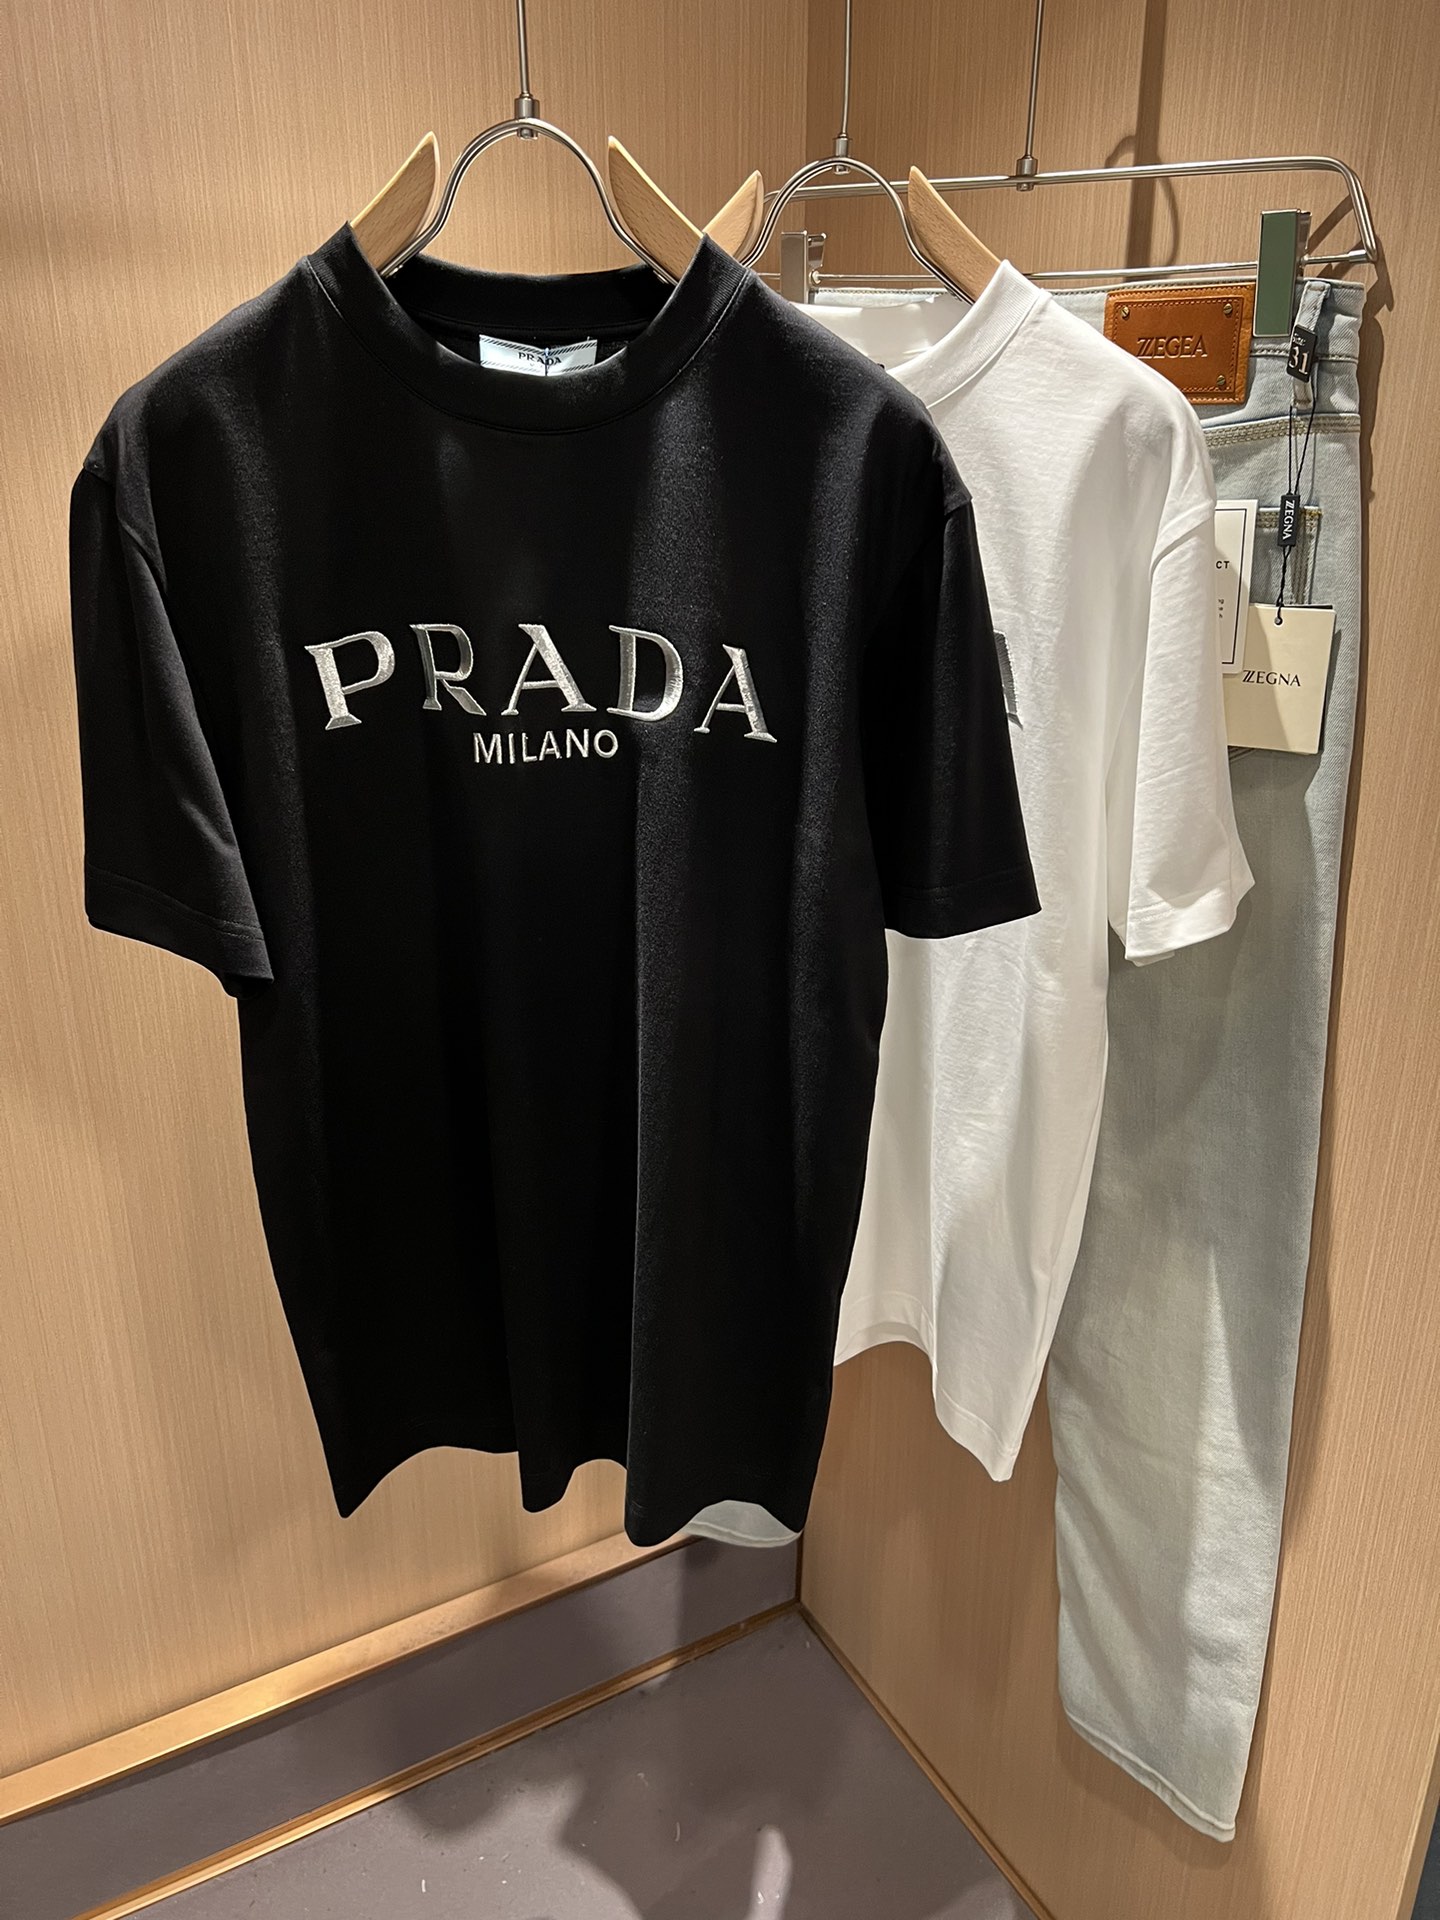 New Designer Replica
 Prada Clothing T-Shirt Buy Cheap
 Embroidery Unisex Cotton Spring/Summer Collection Fashion Short Sleeve